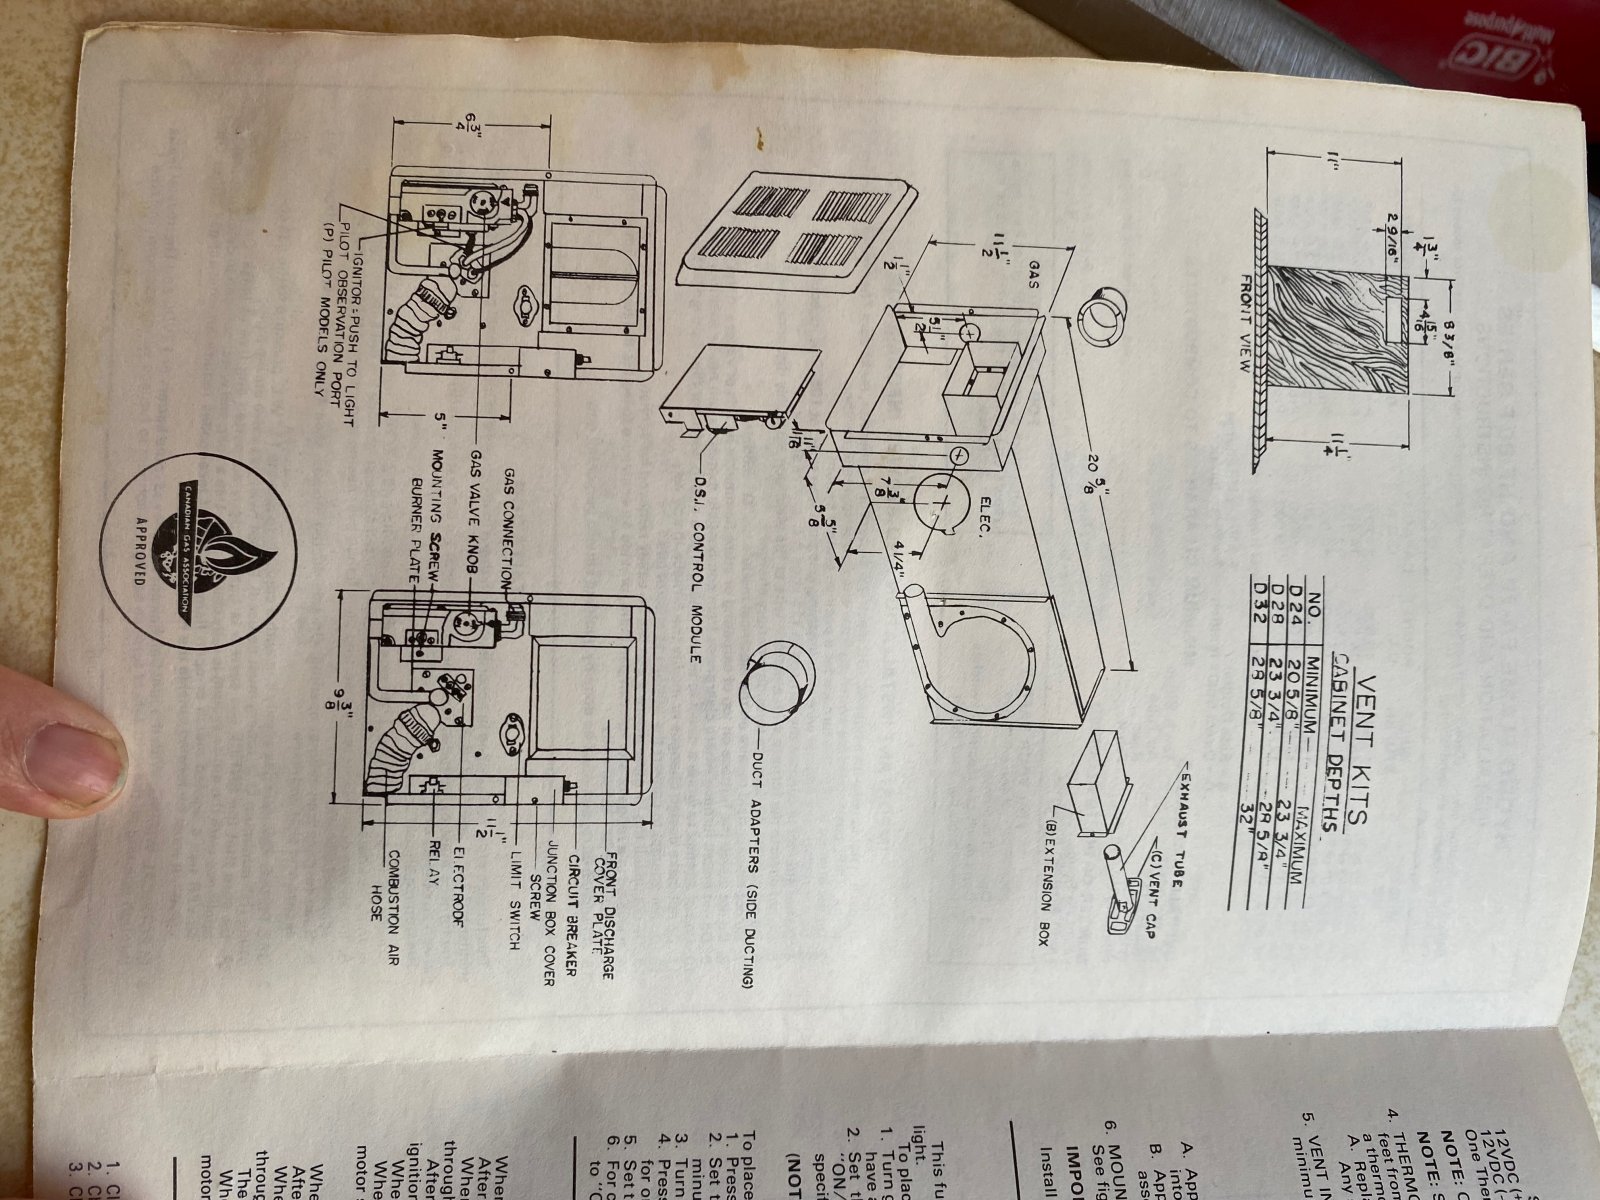 Image from the owner's manual circa 1983